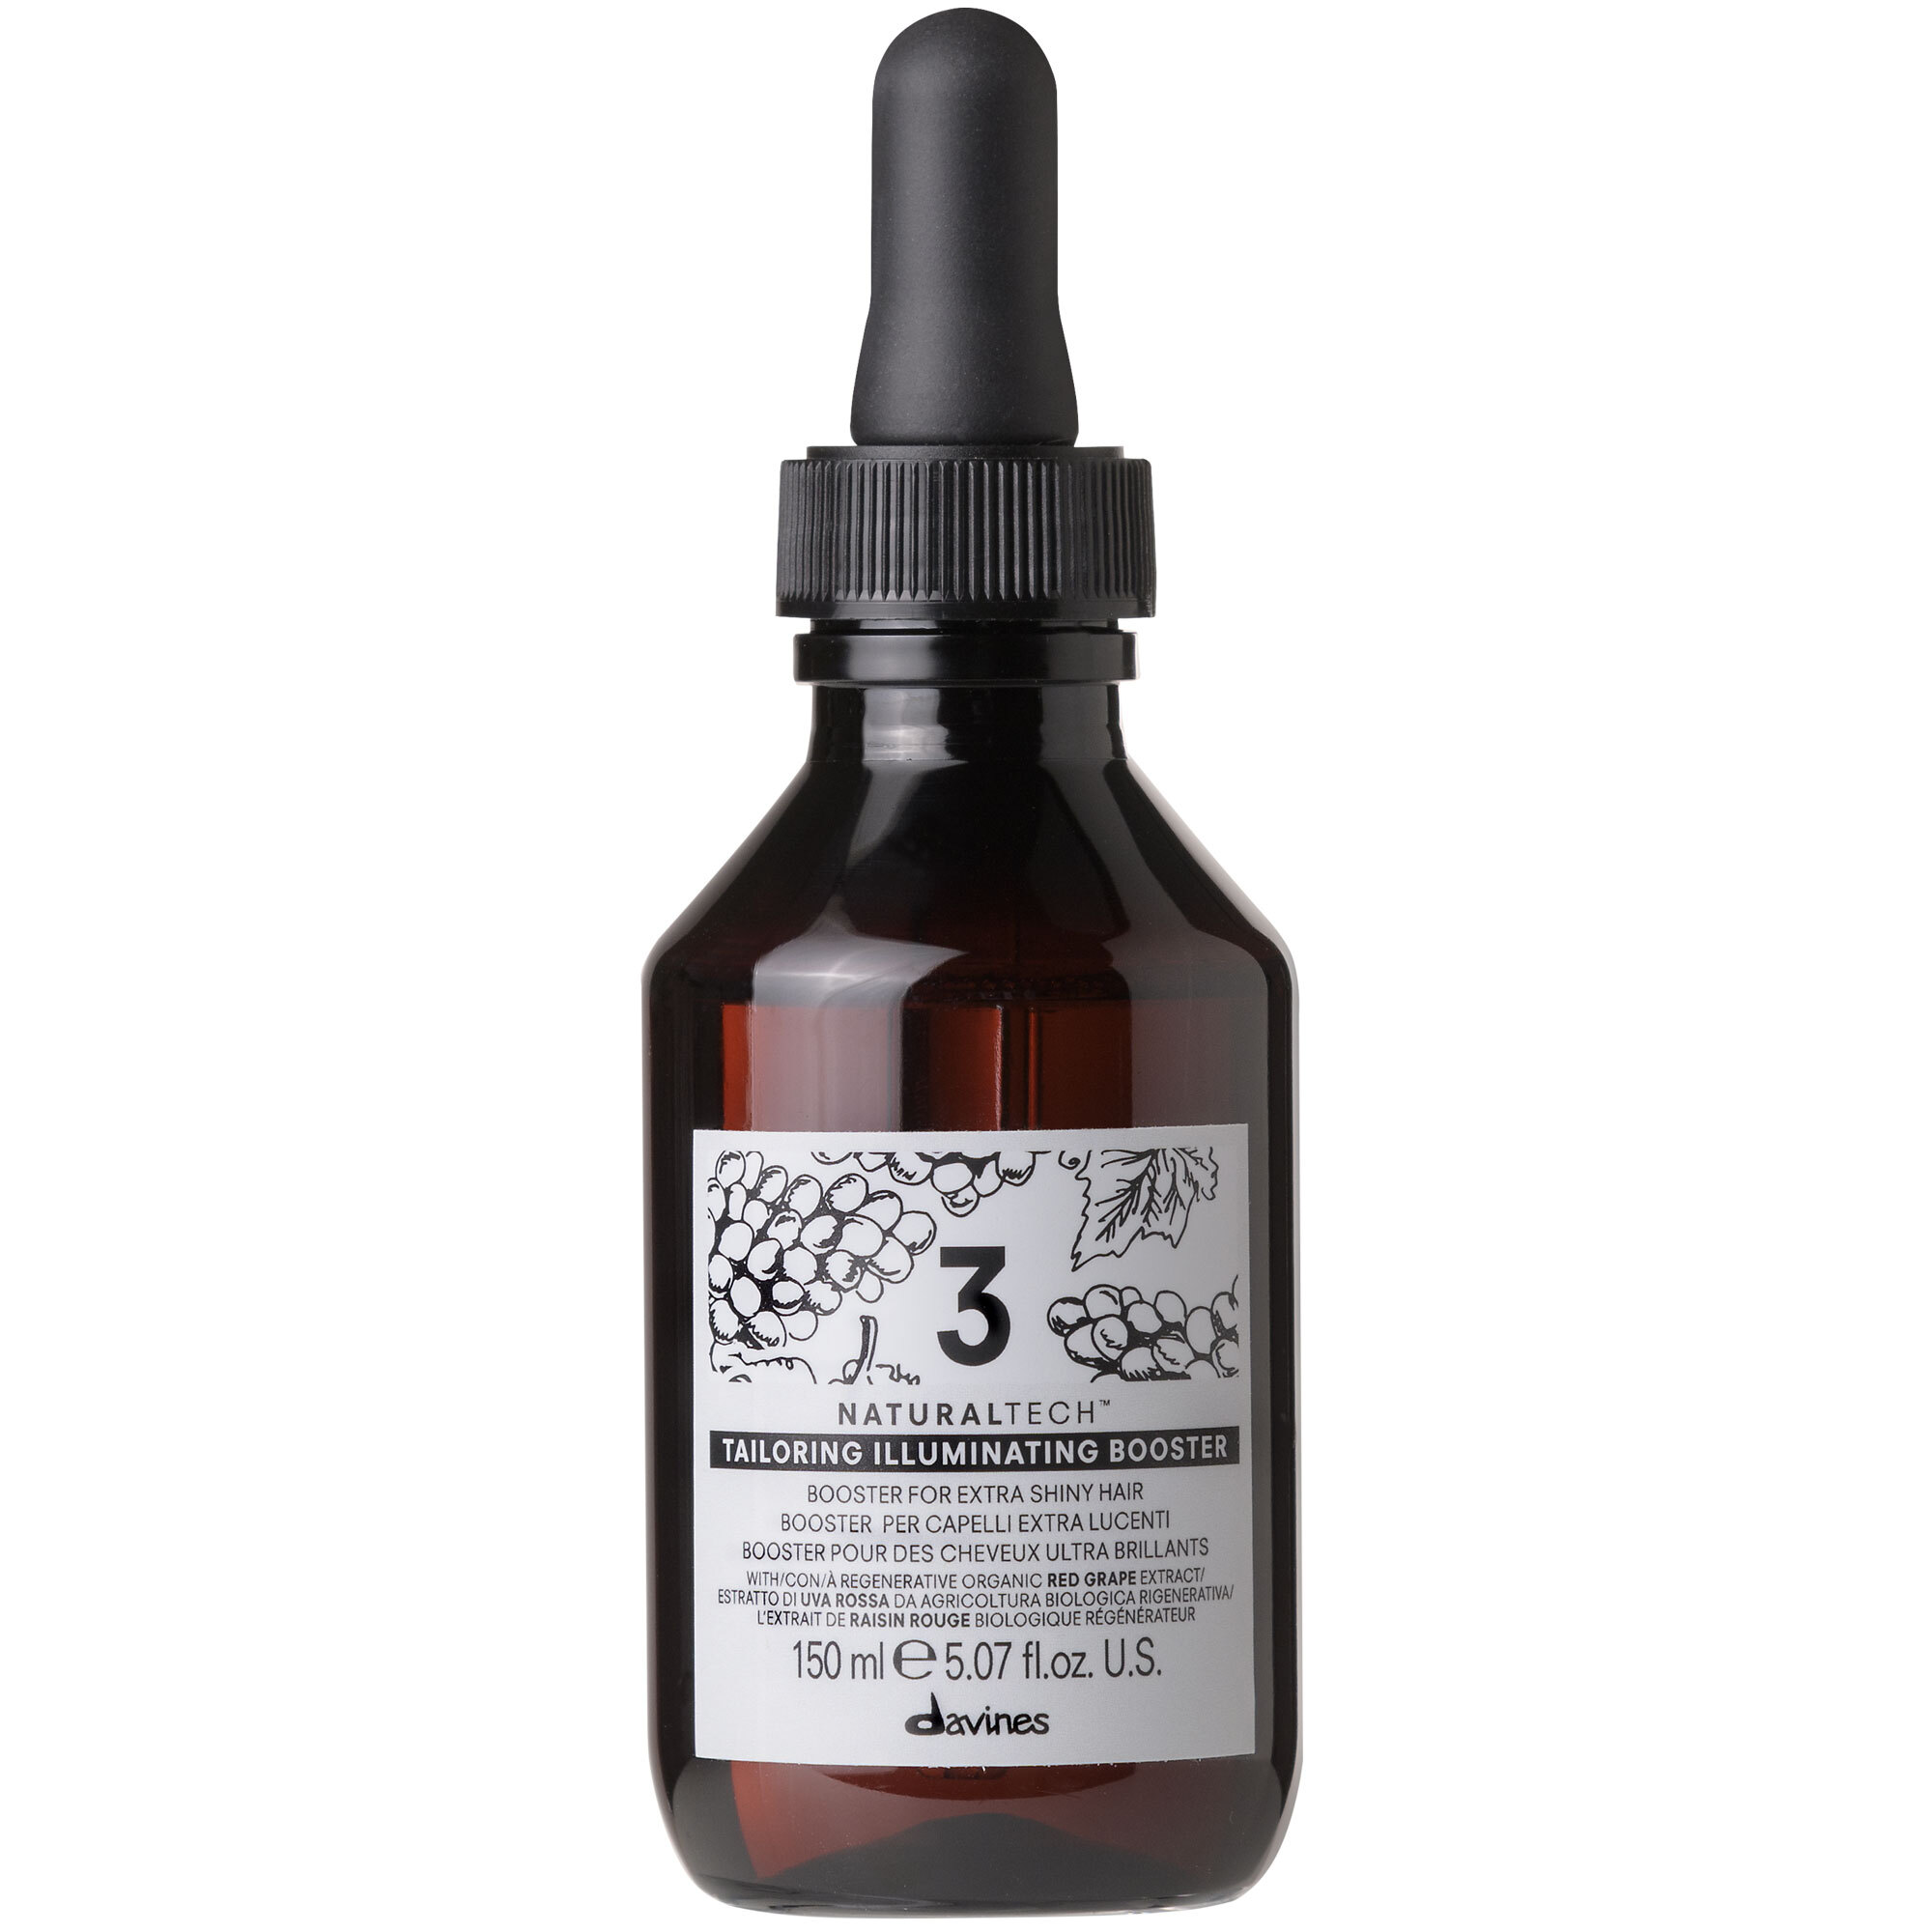 Davines NaturalTech Tailoring: 4 Booster Fortifying - 5.07 oz 